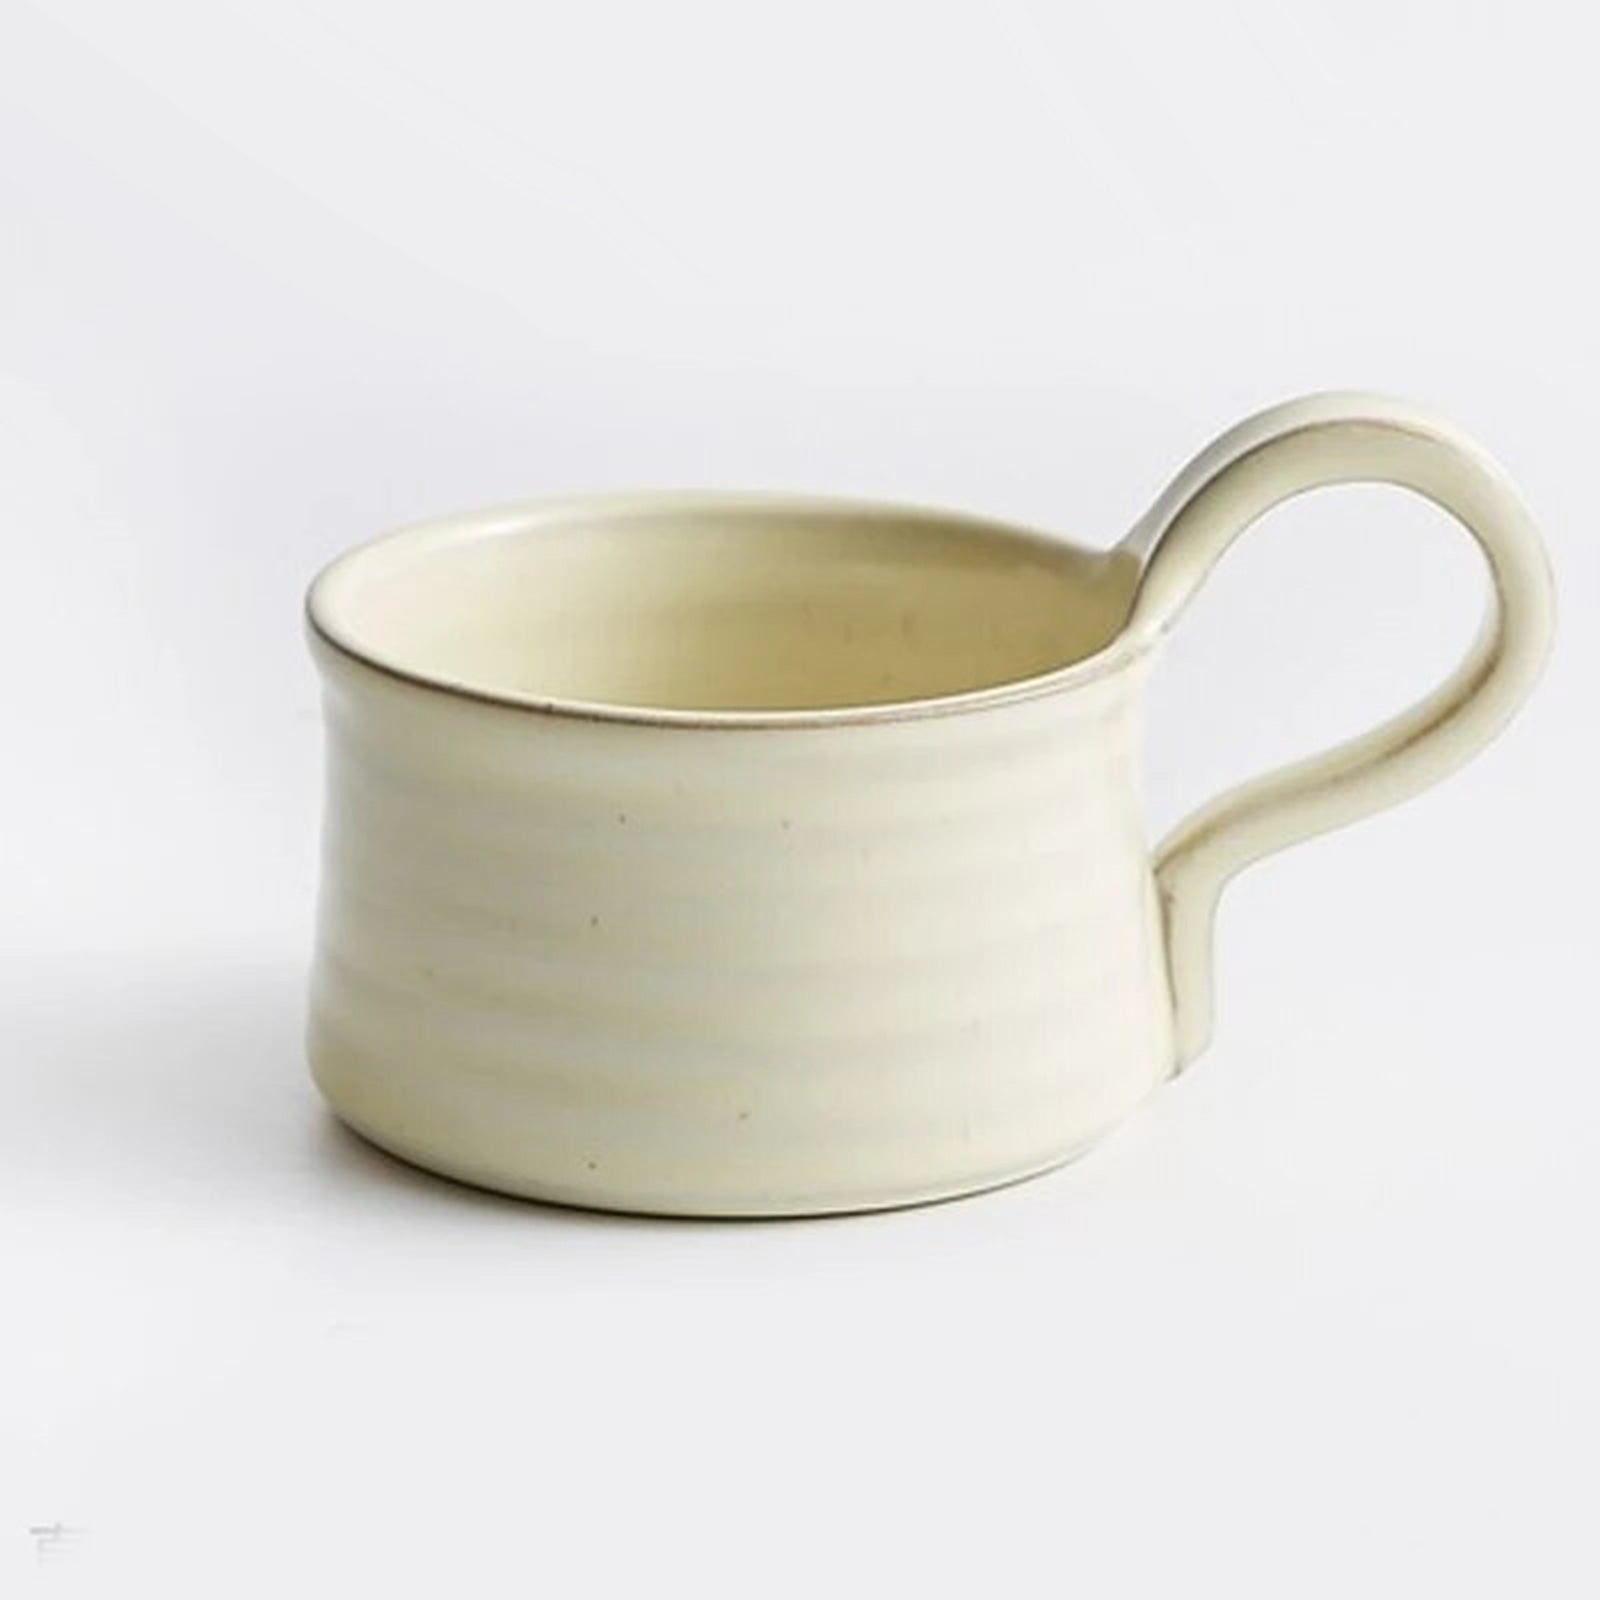 Retro Japanese Mugs with Ribs and Cute Curled Ear